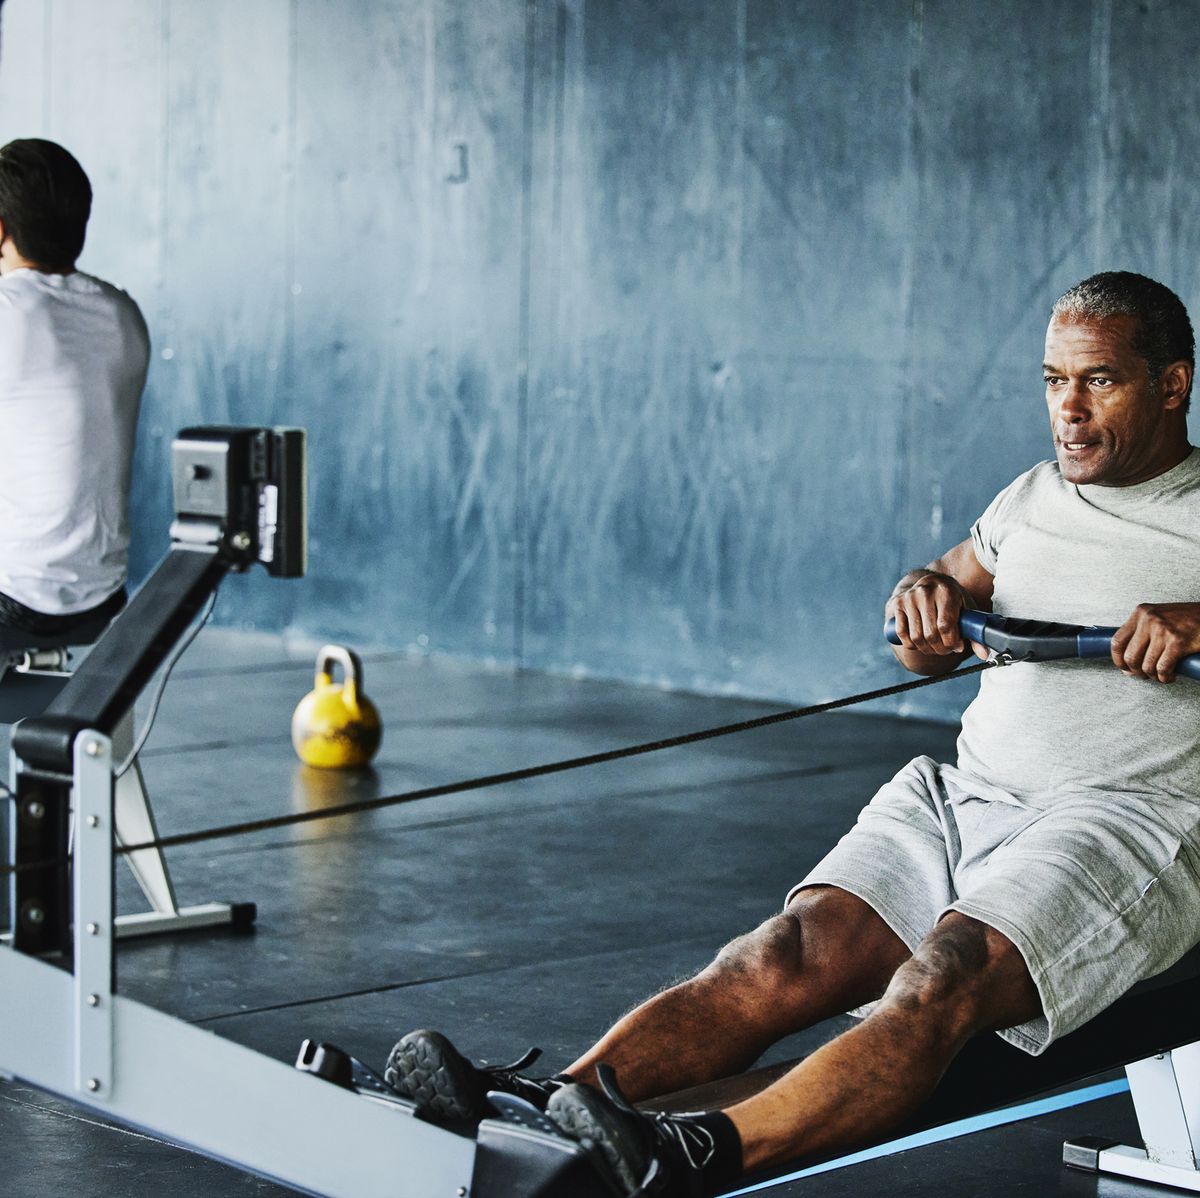 Rowing: What It Is, Health Benefits, and Getting Started